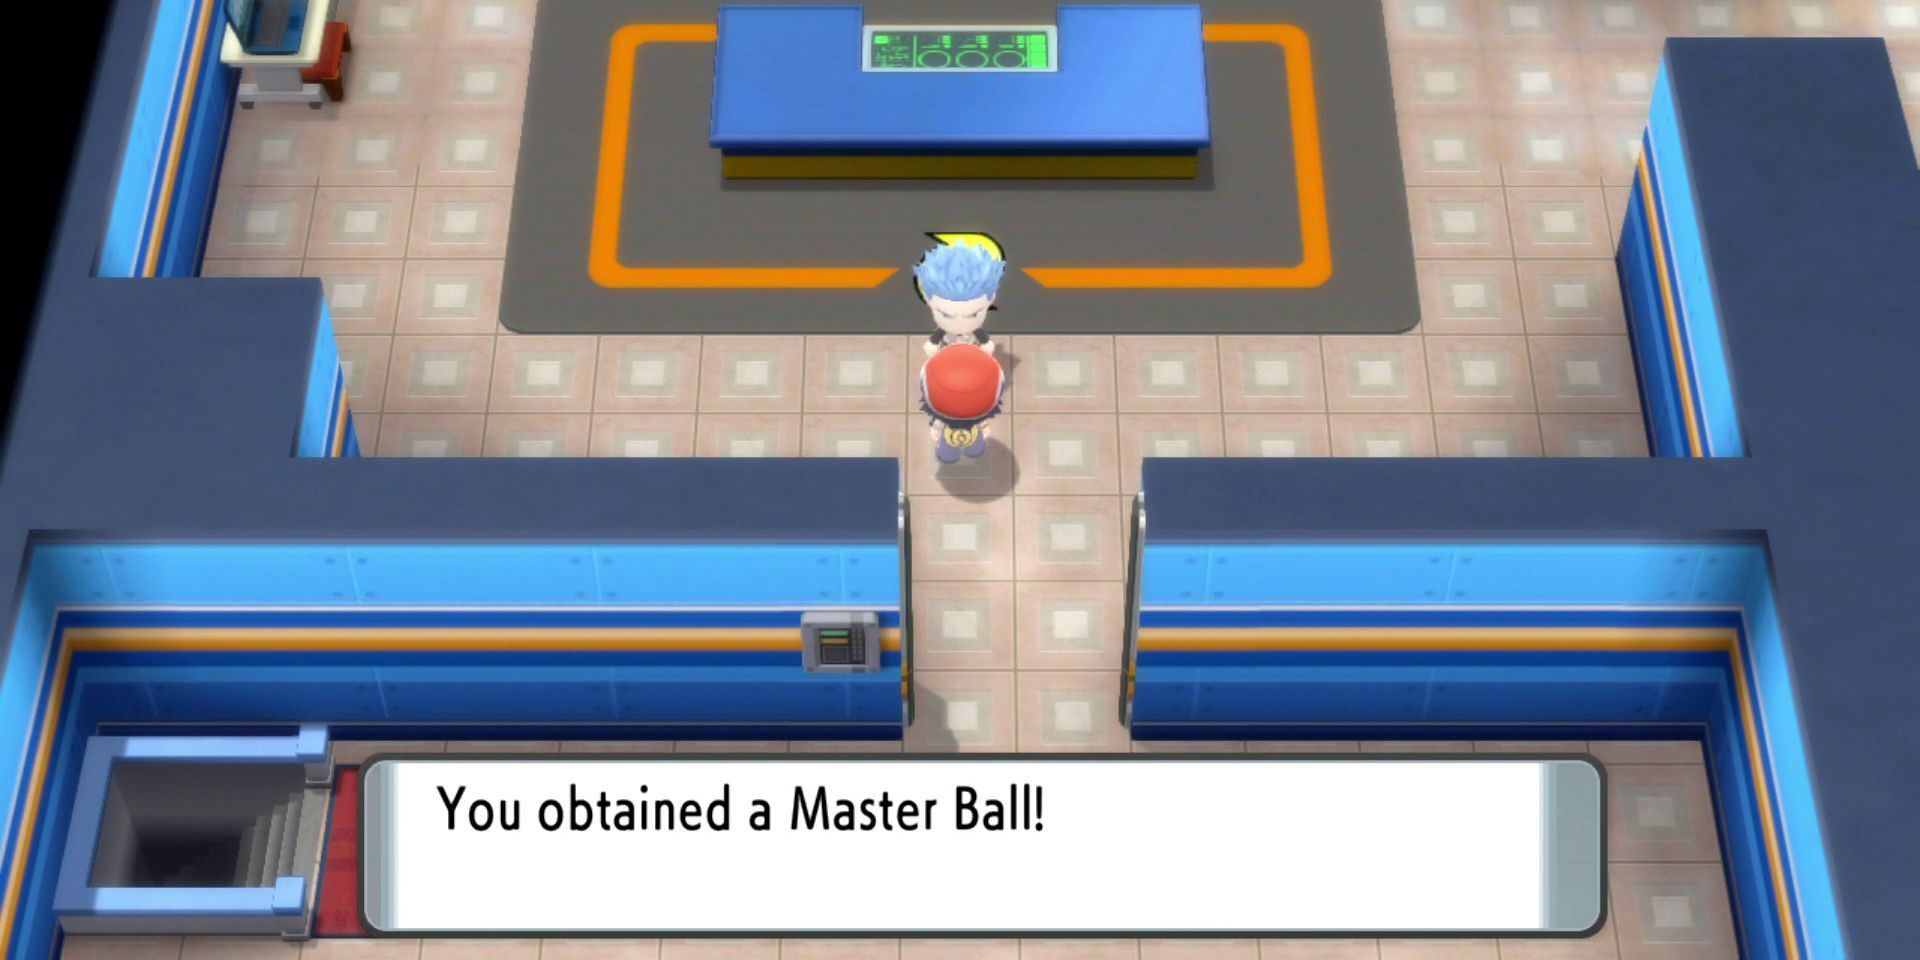 What Each Poke Ball Does And Where To Get It In Pokemon BDSP